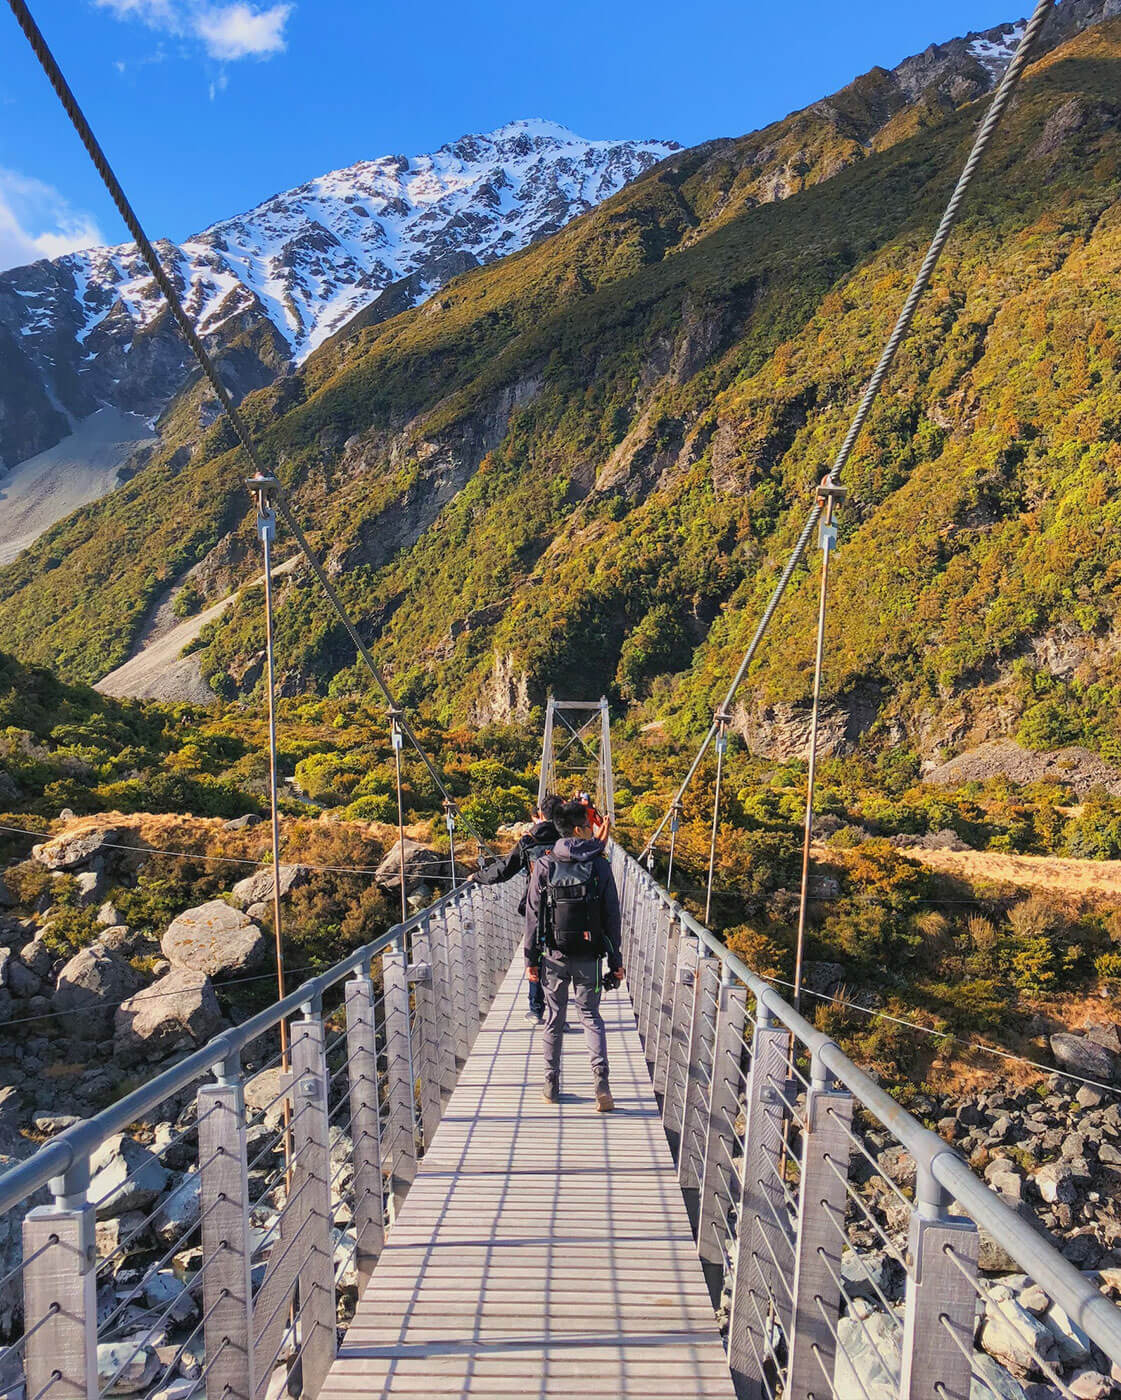 First Suspension Bridge  at Hooker Valley - 10-Day New Zealand South Island Road Trip Itinerary